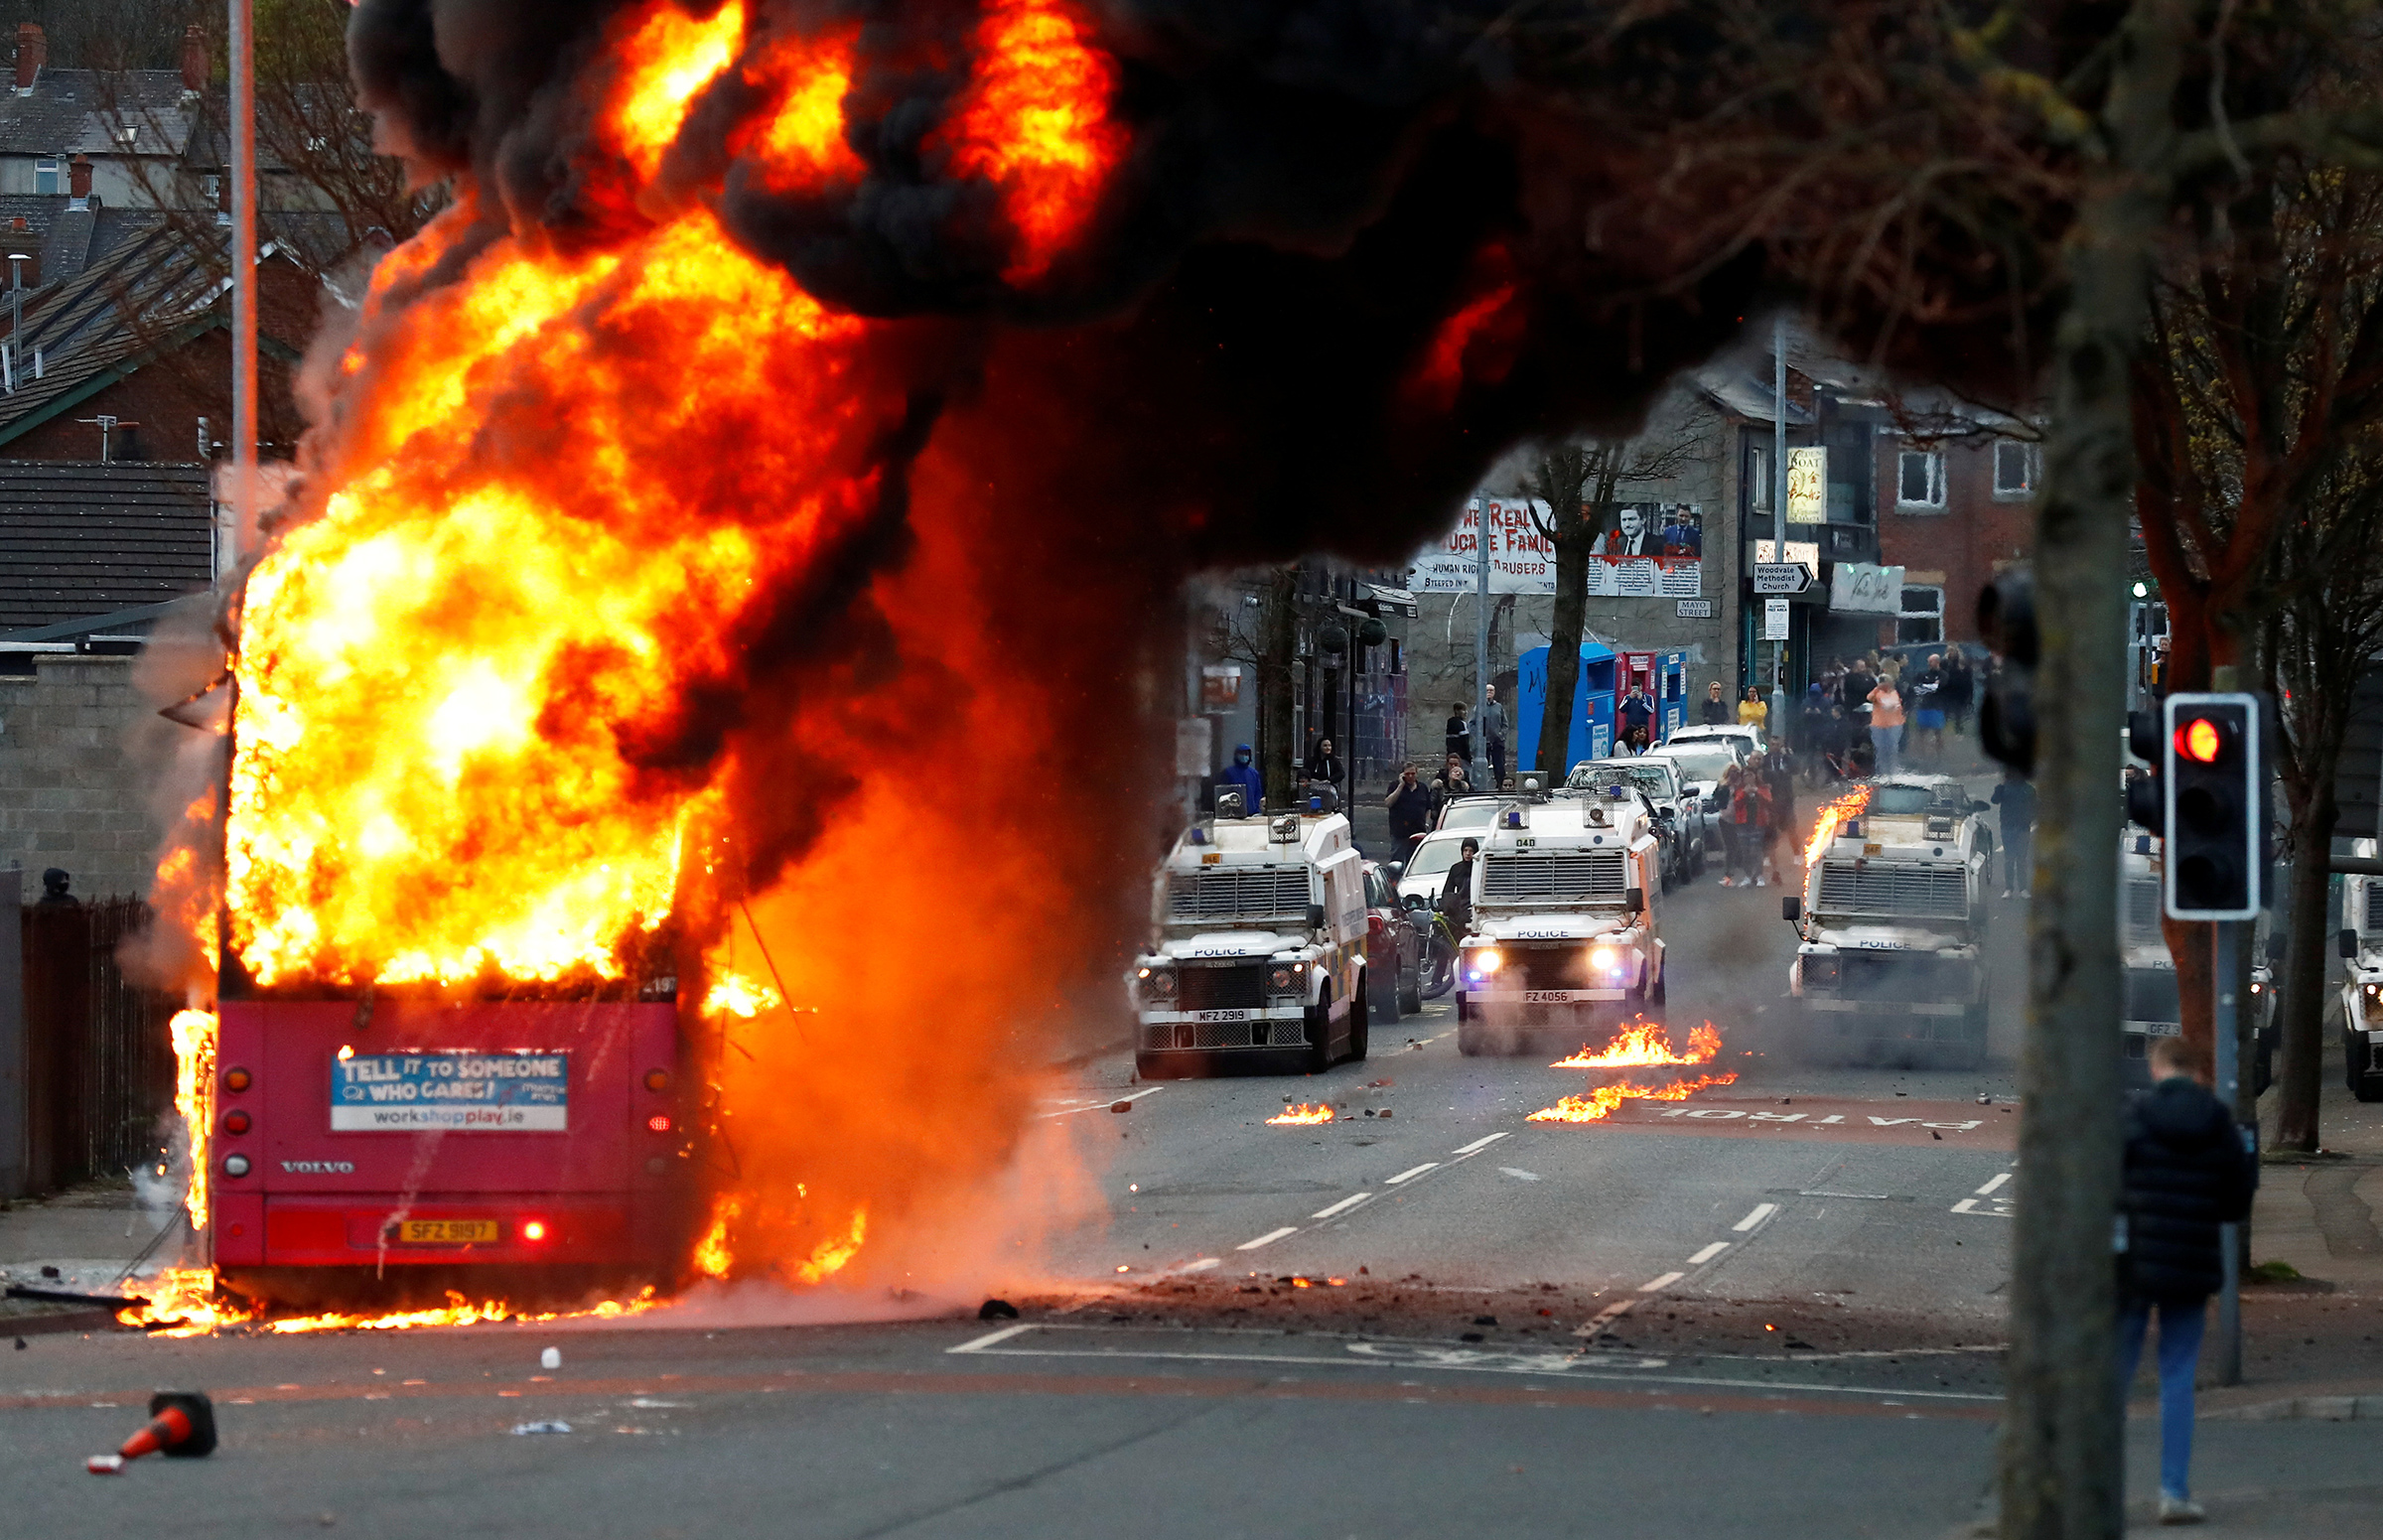 Police vehicles are seen behind a hijacked bus burns on the Shankill Road as protests continue in Belfast, Northern Ireland, April 7. (Jason Cairnduff—Reuters)